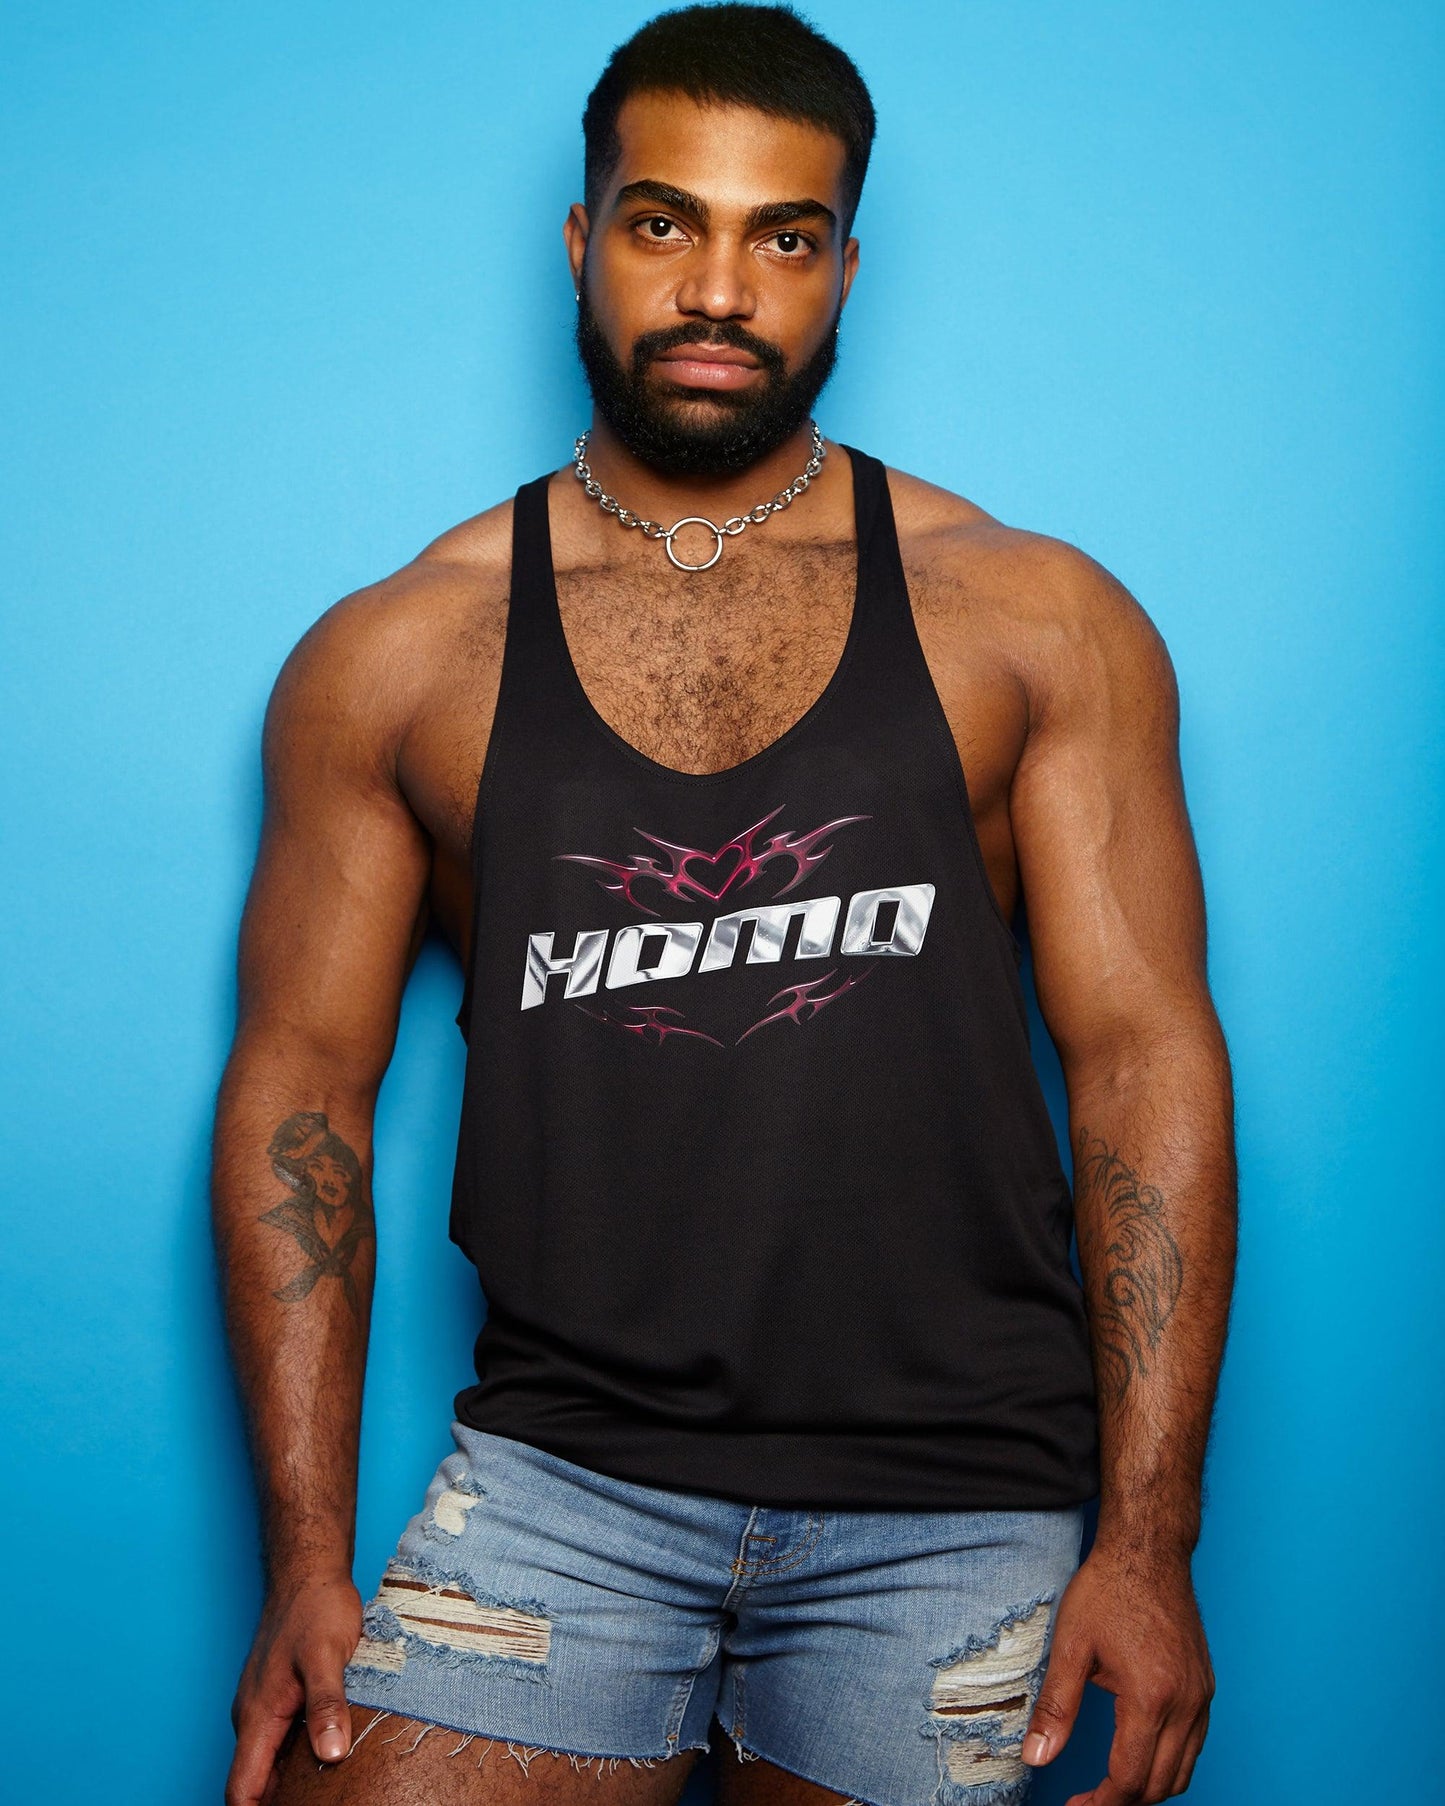 Double Pack - Chrome Y2K: HOMO, silver and pink on black- tank and basket ball shorts - Full outfit.